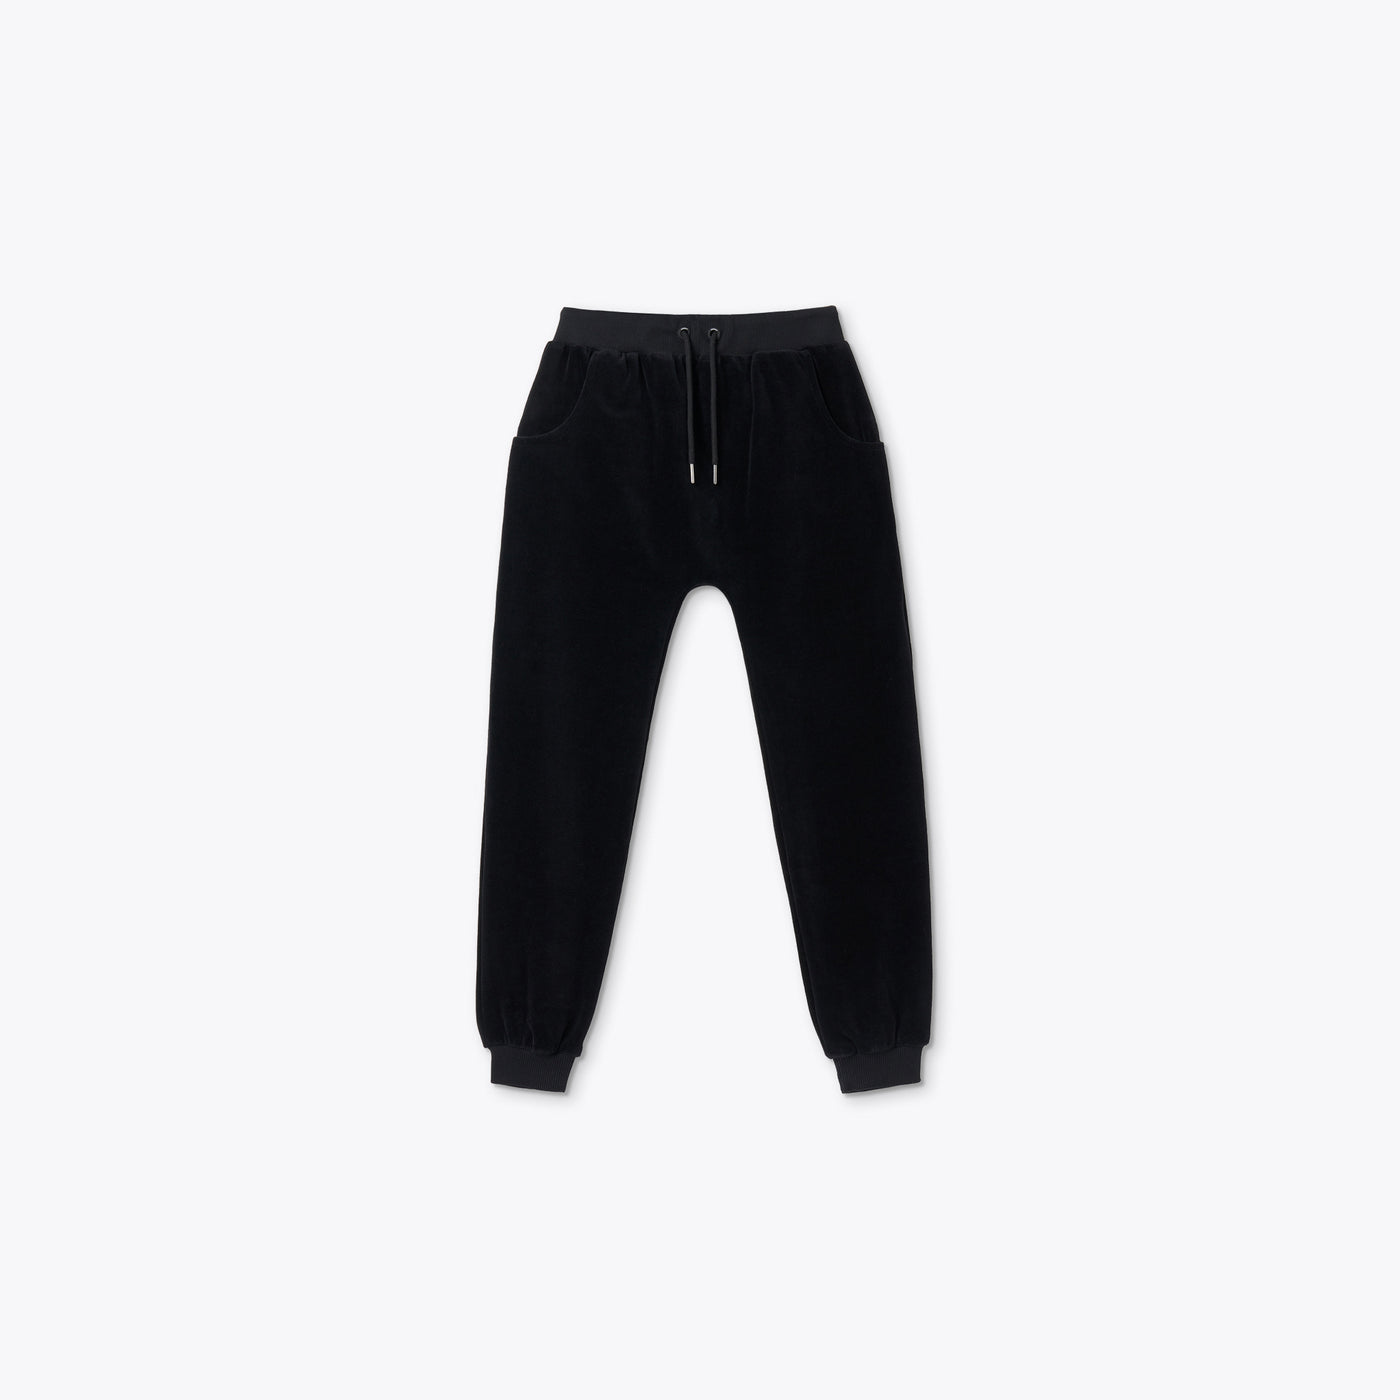 FULLY LINED KNITTED PANTS